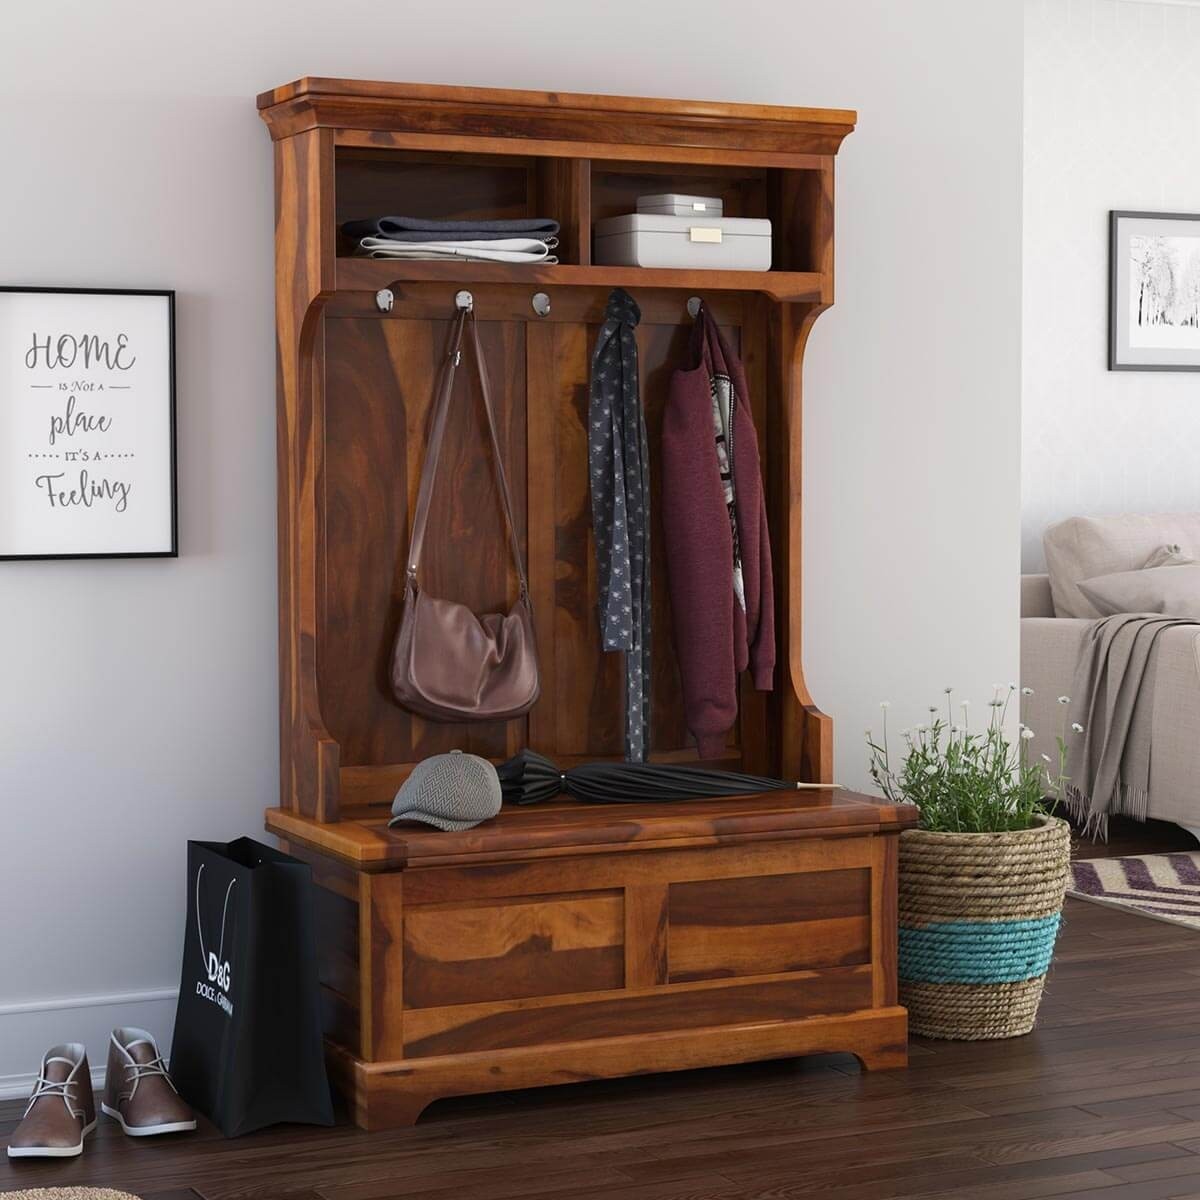 Entryway Hall Tree With Storage Bench - Ideas on Foter